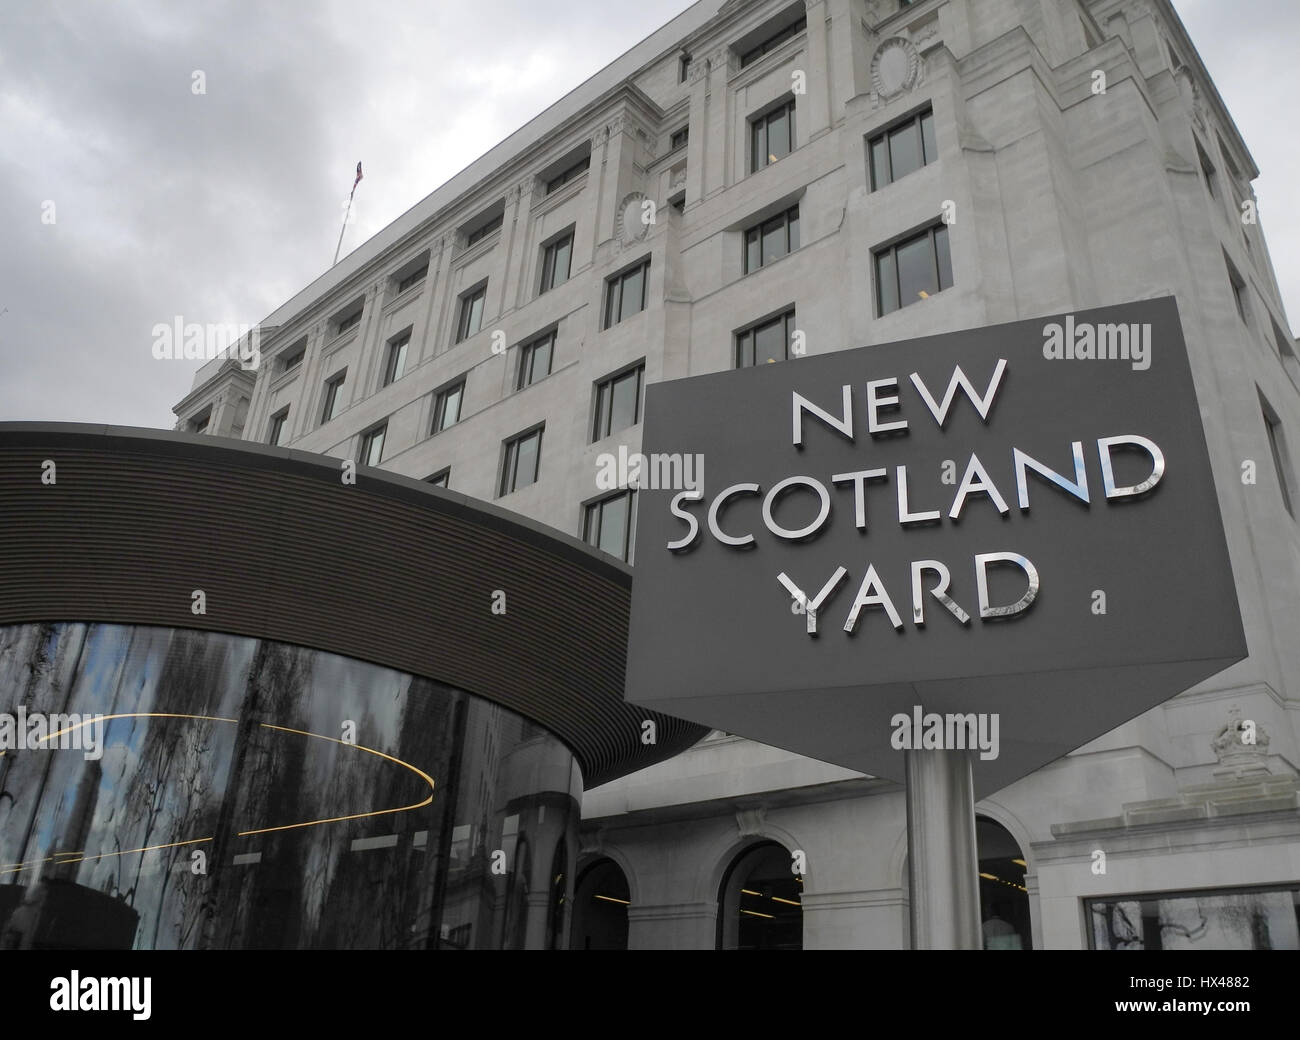 London, UK. 21st Mar, 2017. The new building of the Metropolitan Police Service (MPS) of London, also known as Scotland Yard, in London, England, 21 March 2017. The building was scheduled to be opened by Britain's Queen Elizabeth II on 22 March 2017. Photo: Leonard Kehnscherper/dpa/Alamy Live News Stock Photo